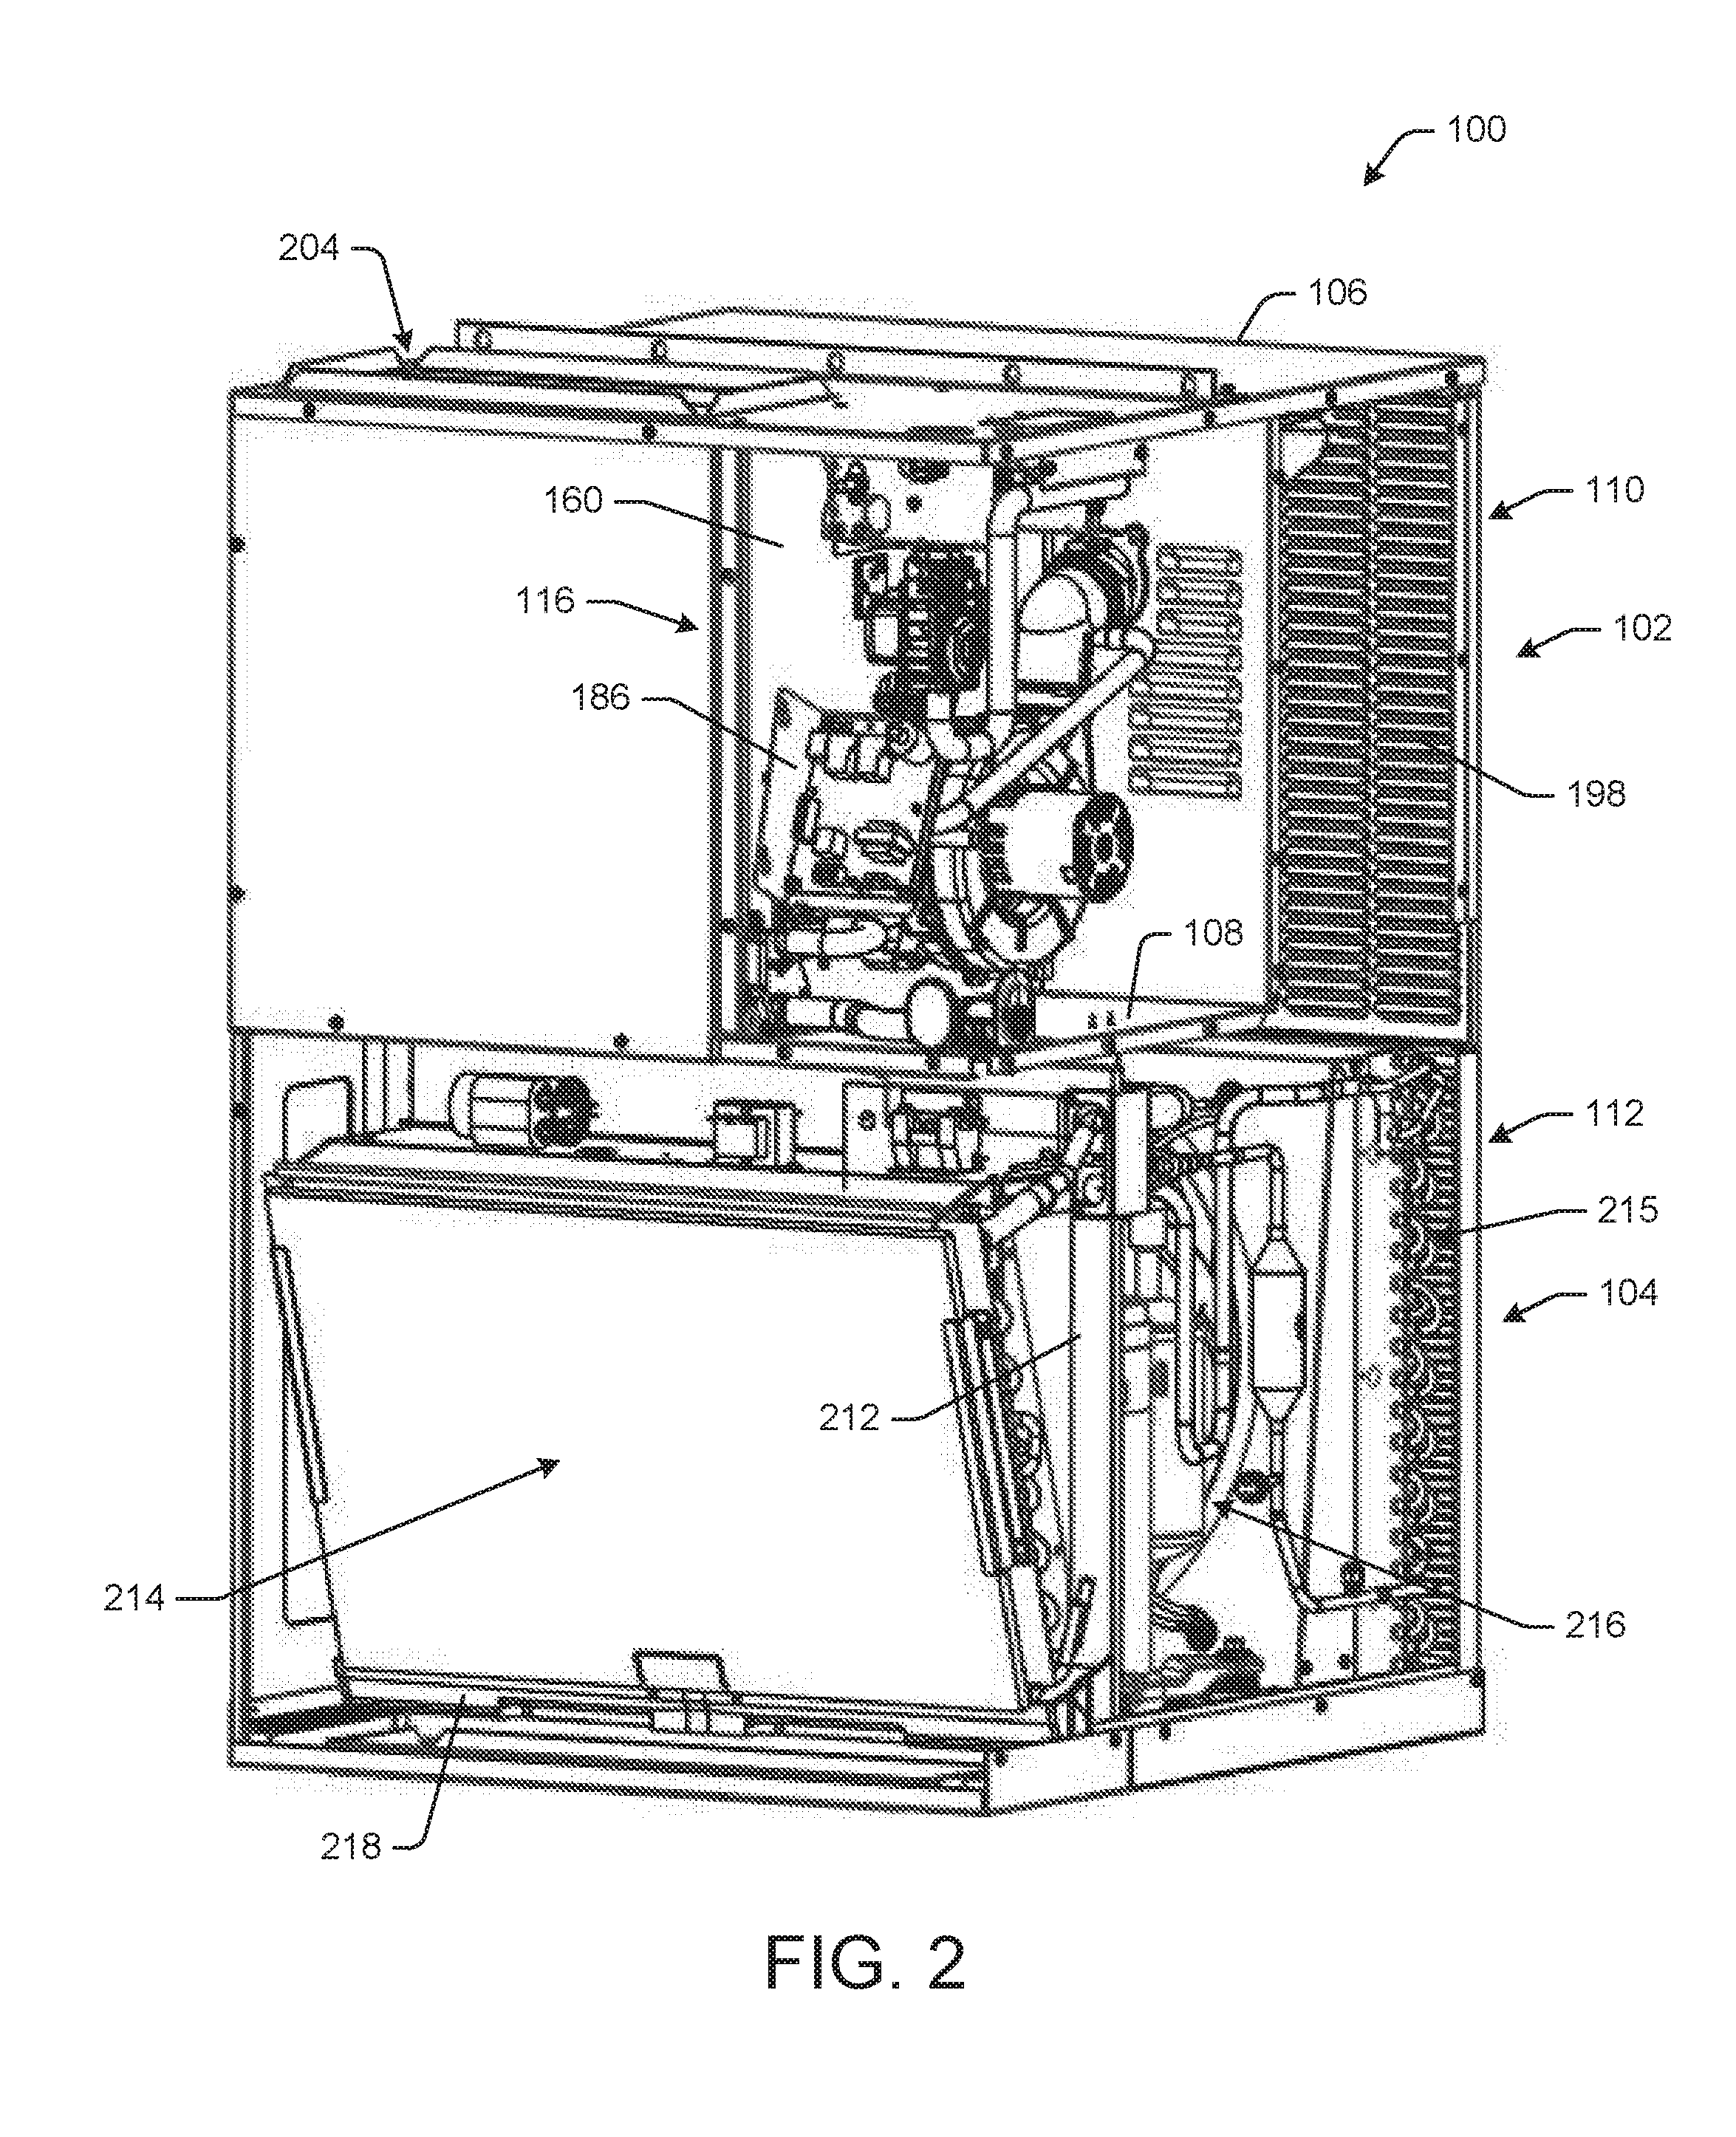 Systems and methods for a heating and cooling unit and components thereof